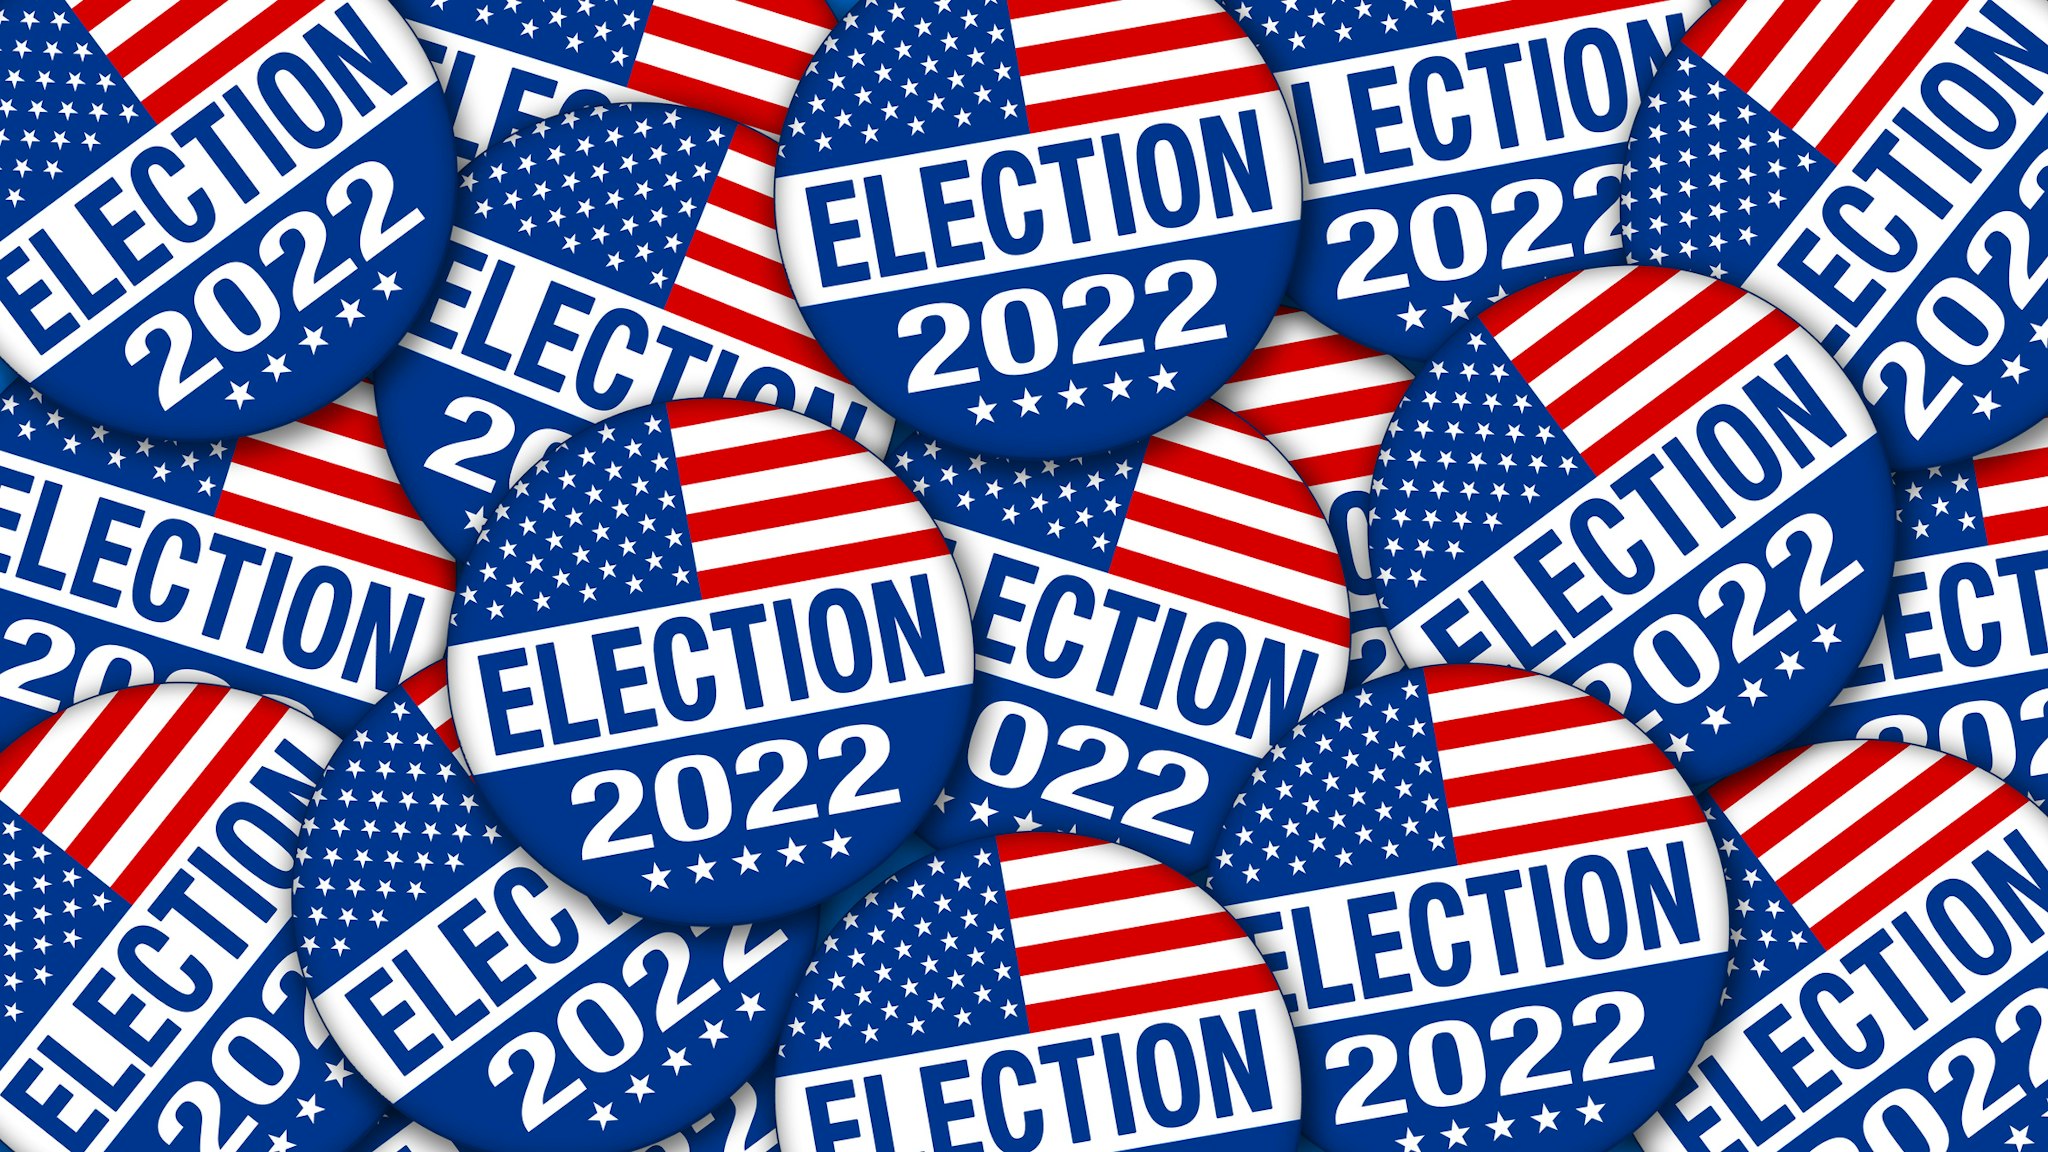 The 2022 midterms promise to change the balance of power in Washington